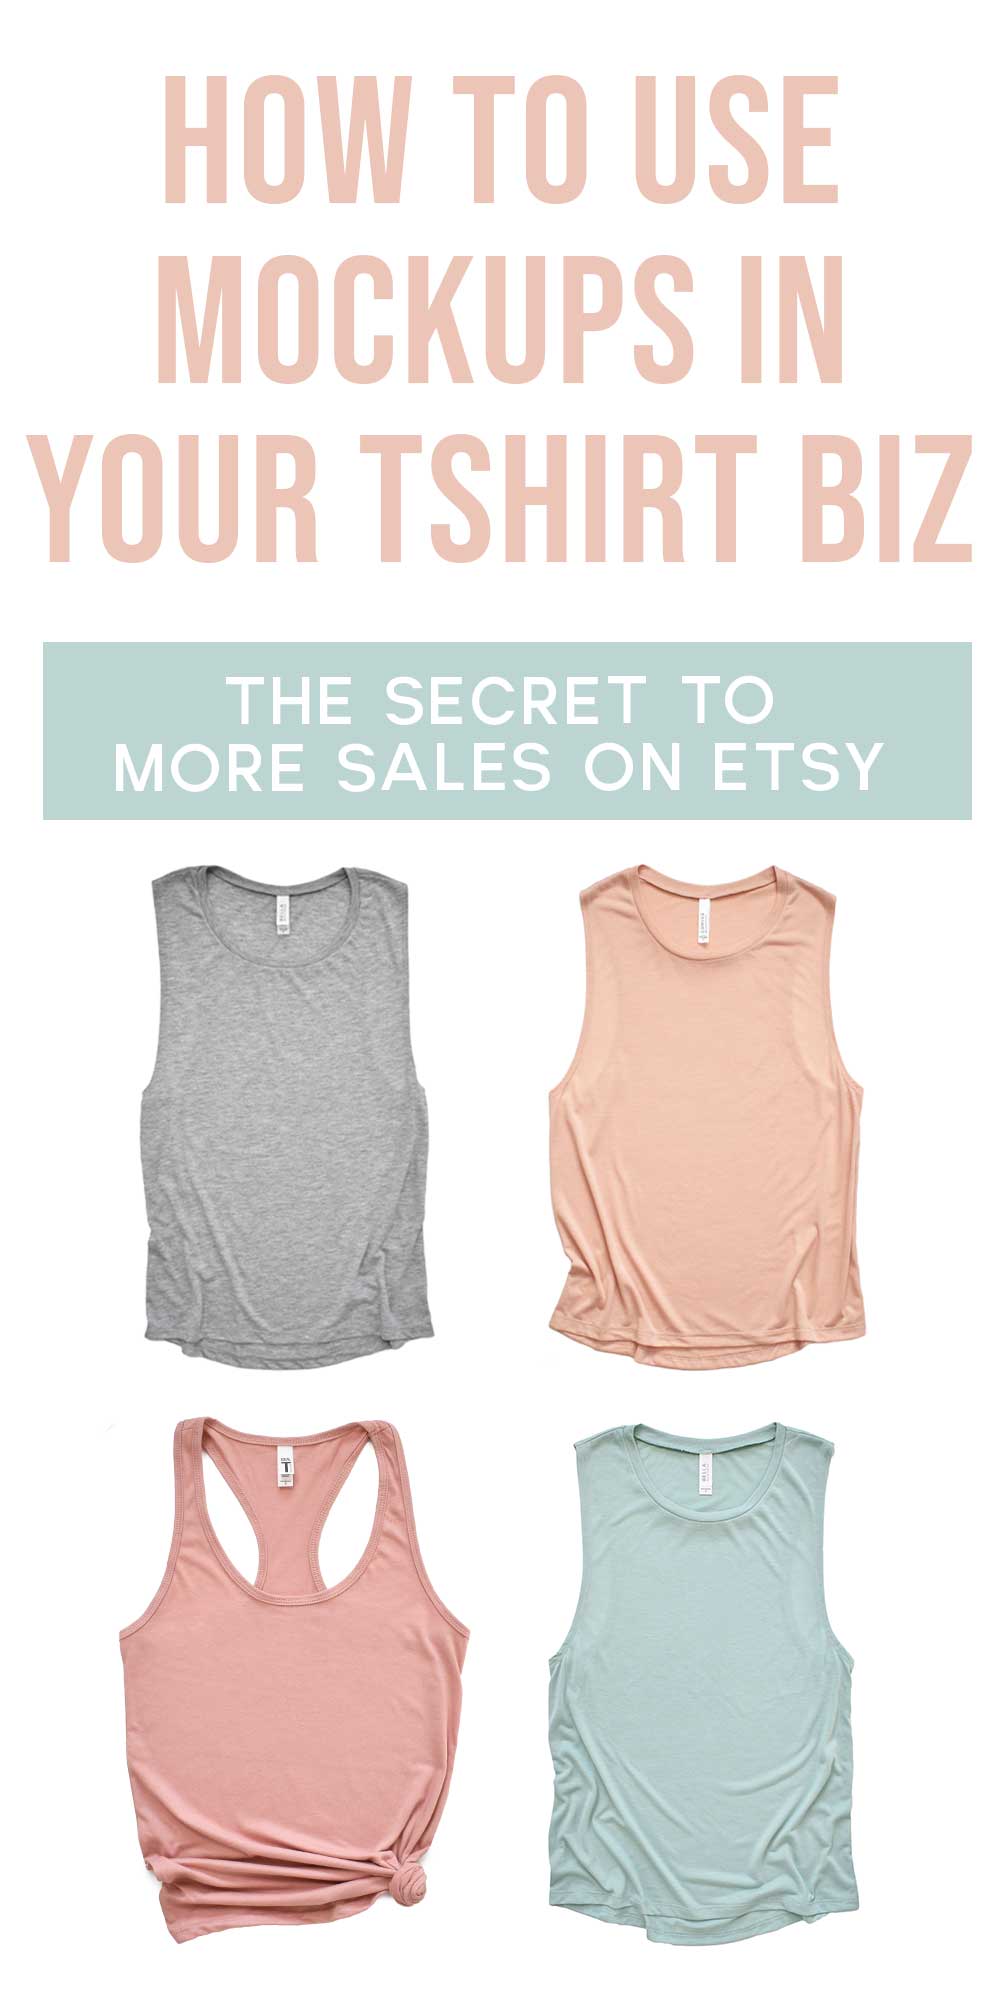 Tshirt Mockups for Your Creative Business + Online Shop